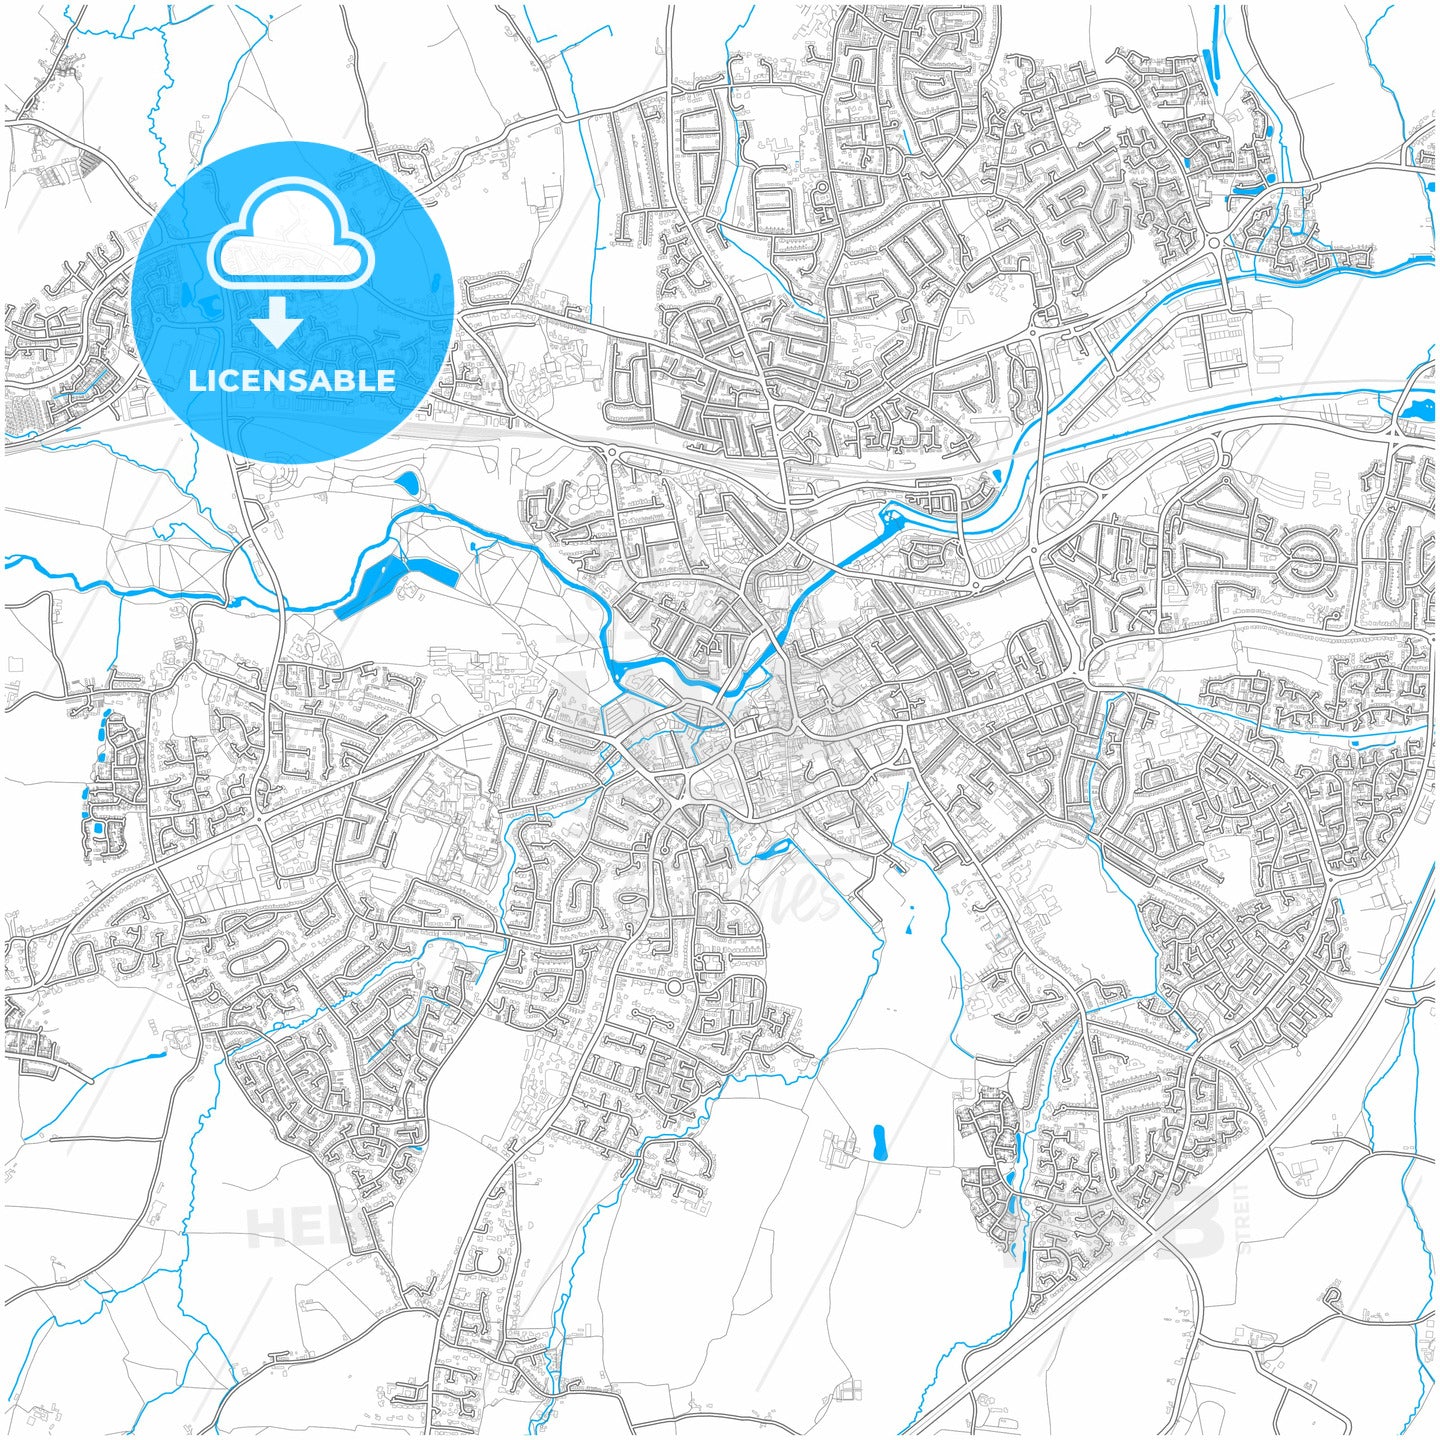 Taunton, South West England, England, city map with high quality roads.